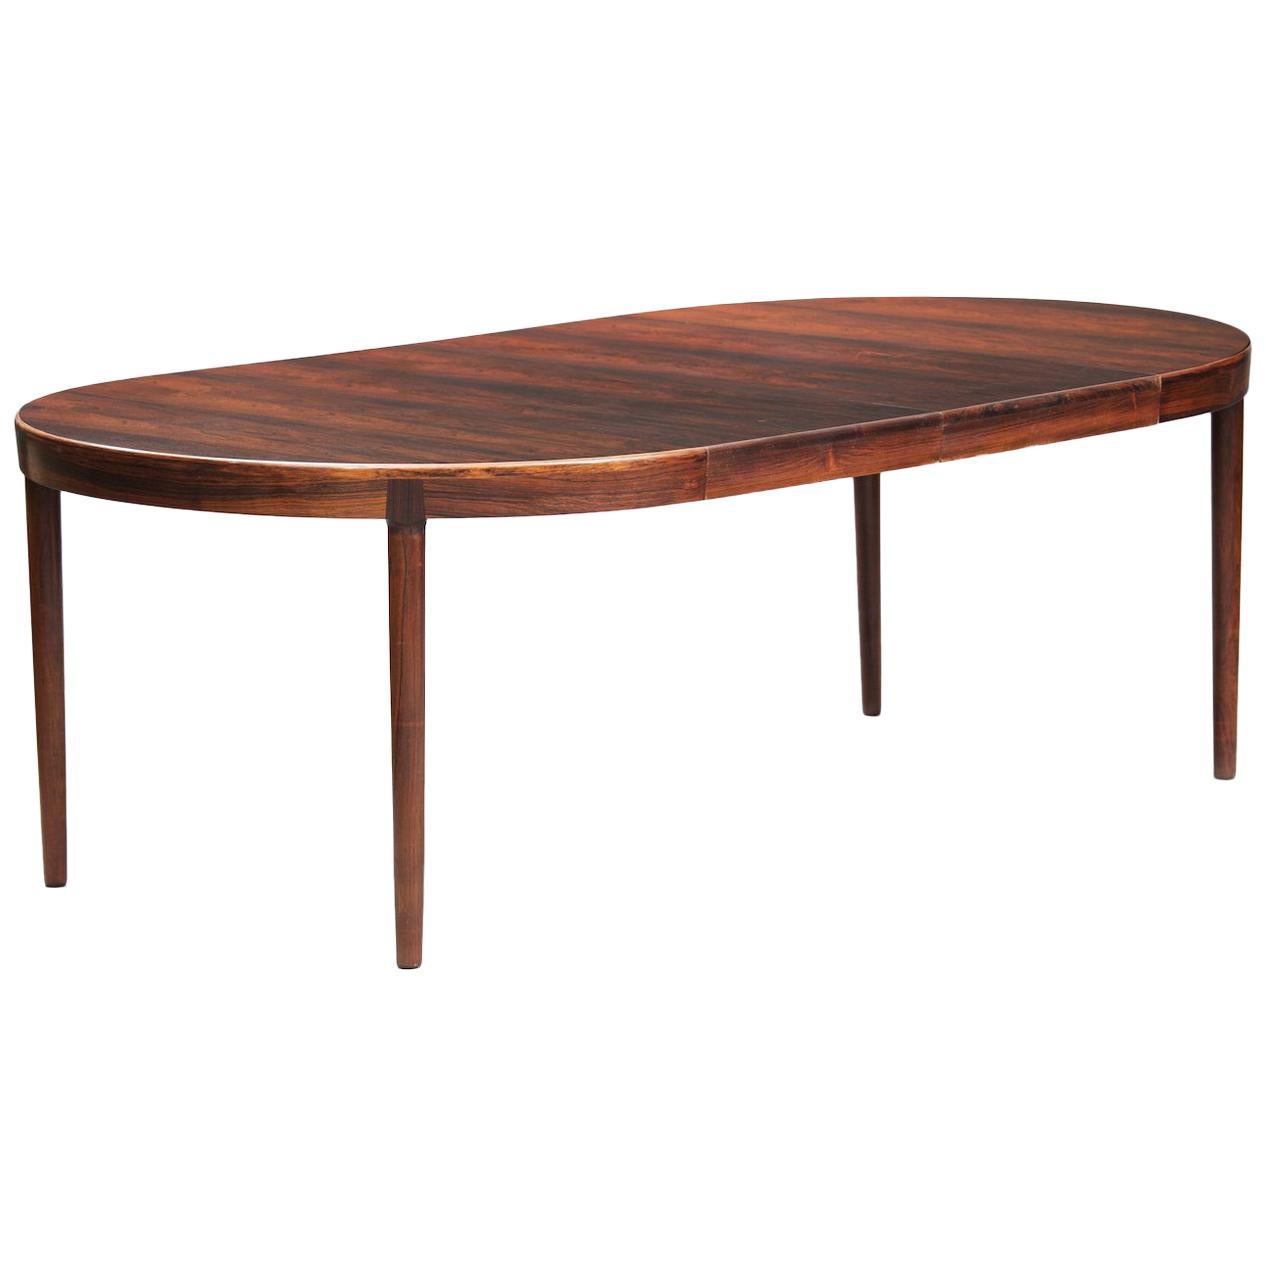 Niels Otto Moller mid-century modern Rosewood Dining Table for J.L. Mollers 